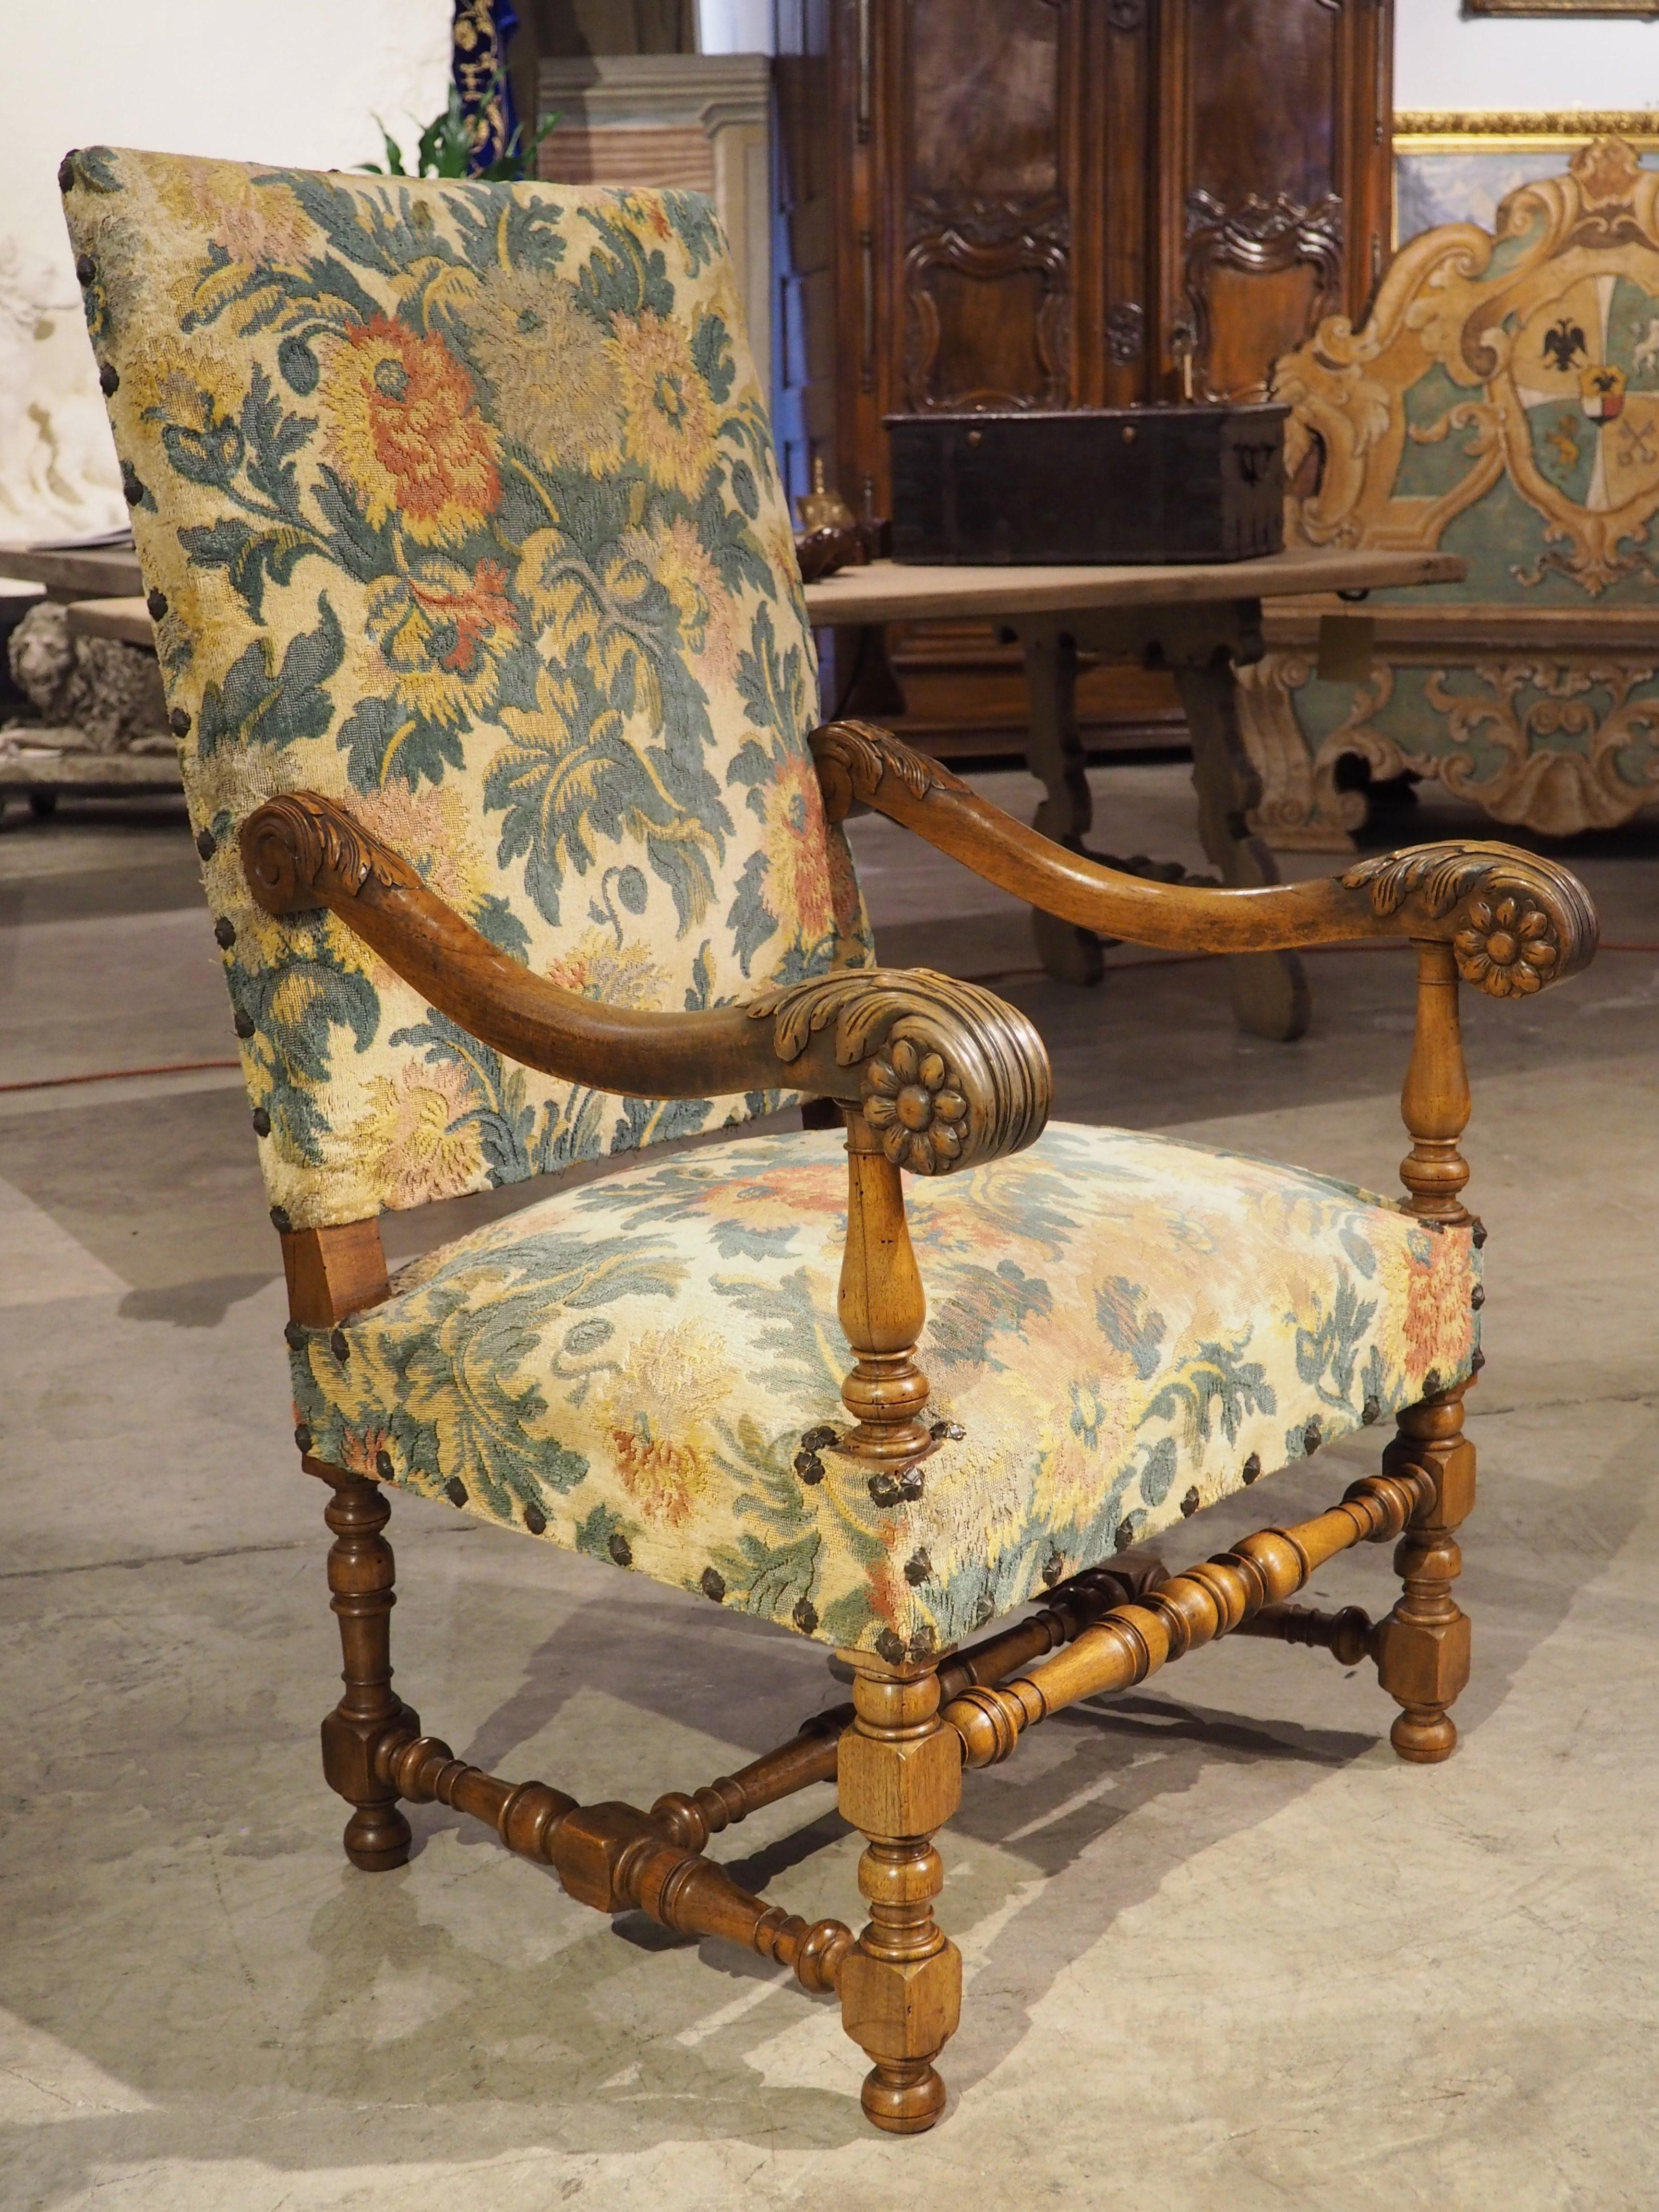 This French walnut fauteuil was hand-carved in France in the 1800’s in the style of Louis XIV. The seat and back have been upholstered in a velvet with green, yellow, and red floral print over a gold background. It is affixed by brass rosettes along